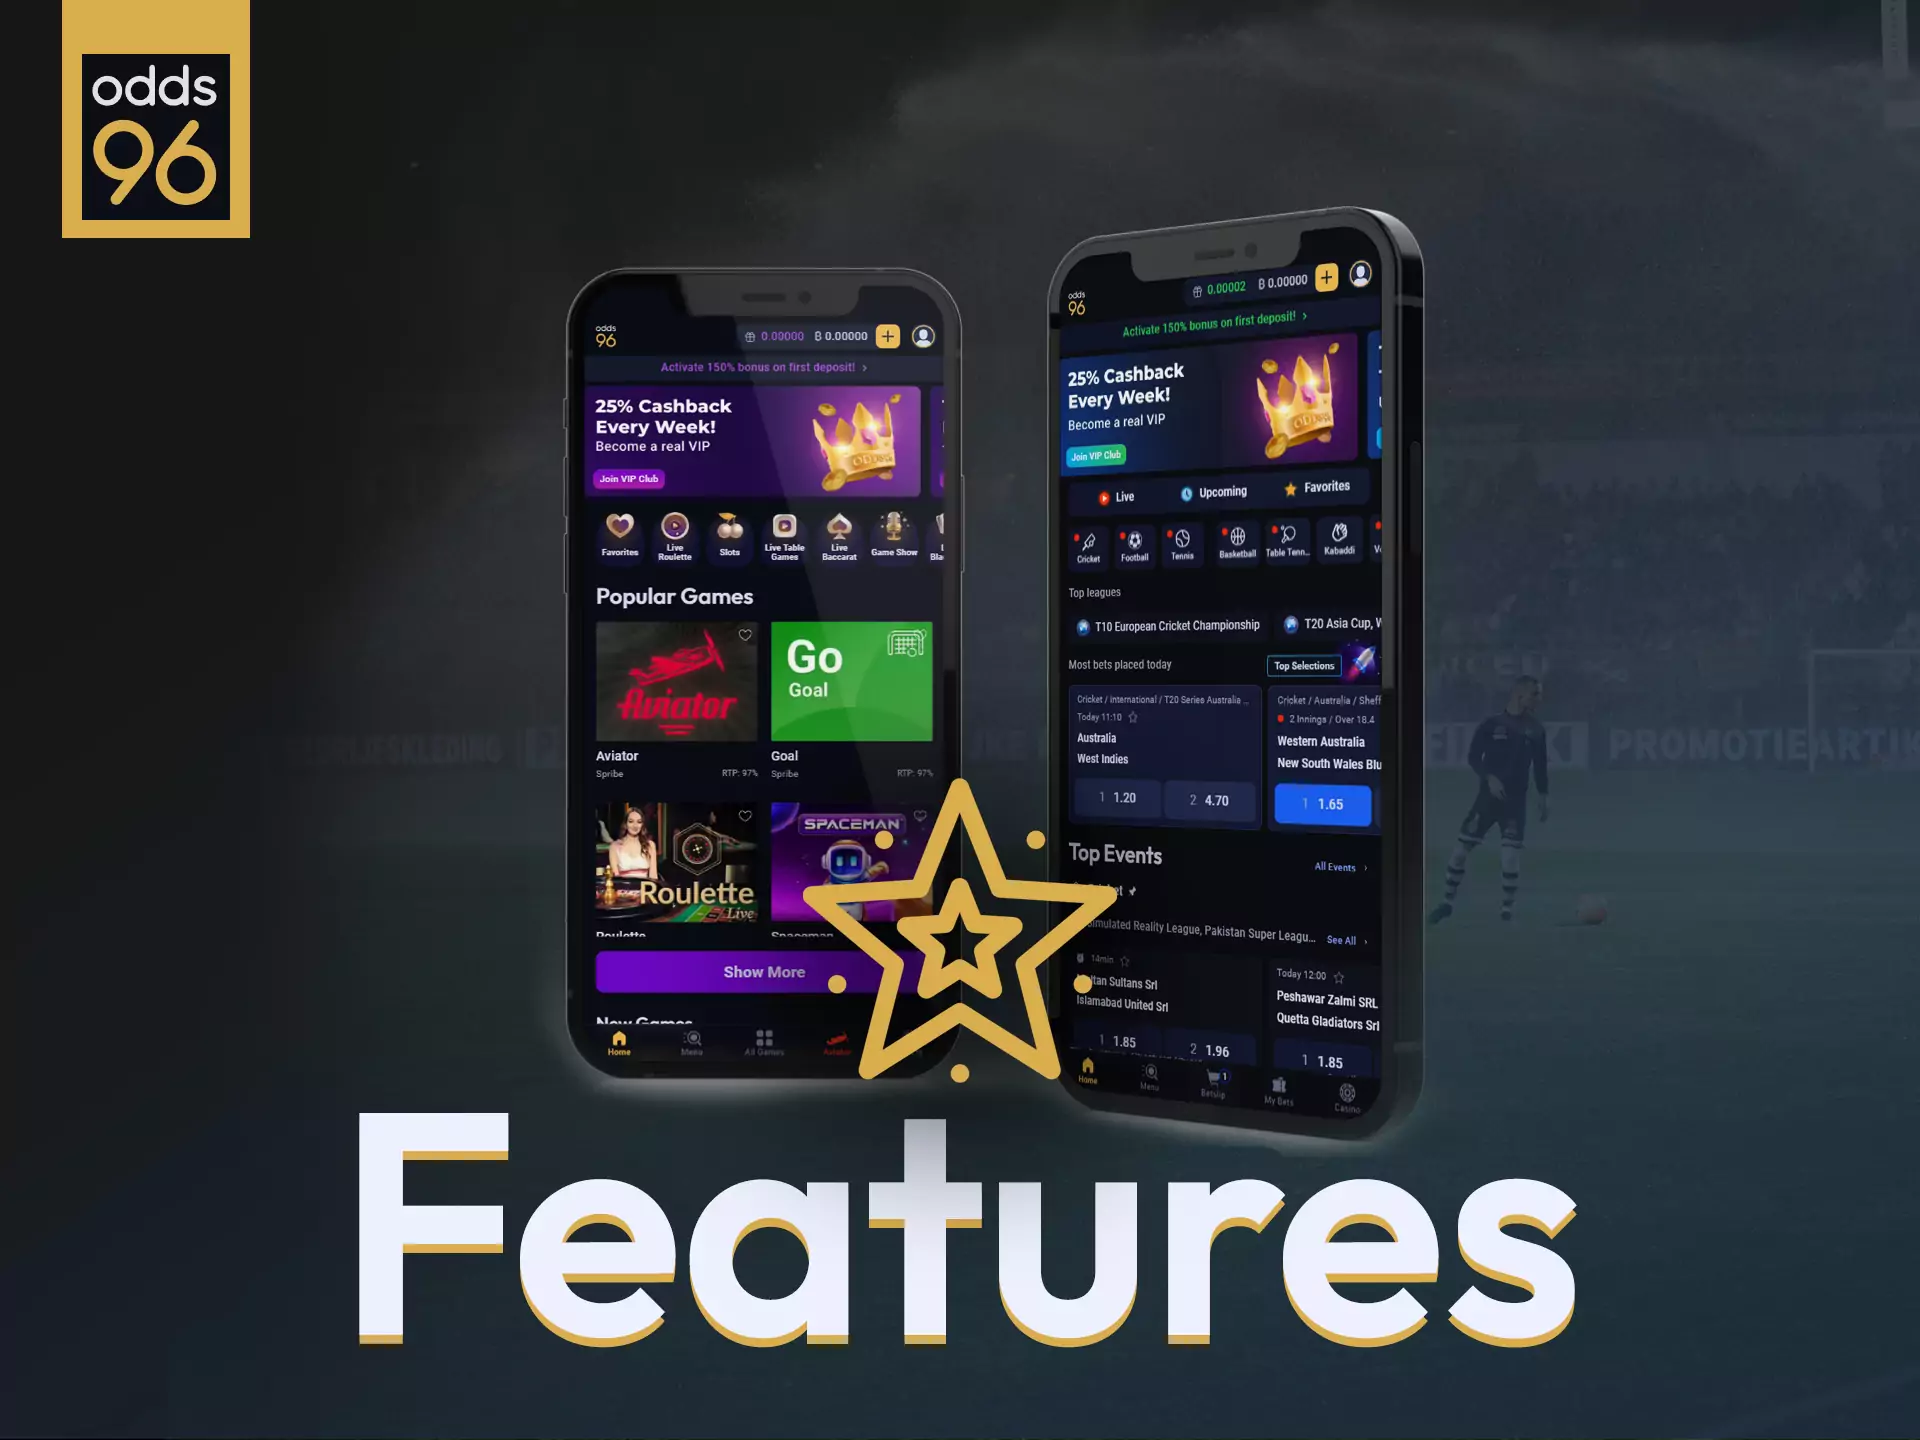 Learn all about the features and benefits of Odds96.